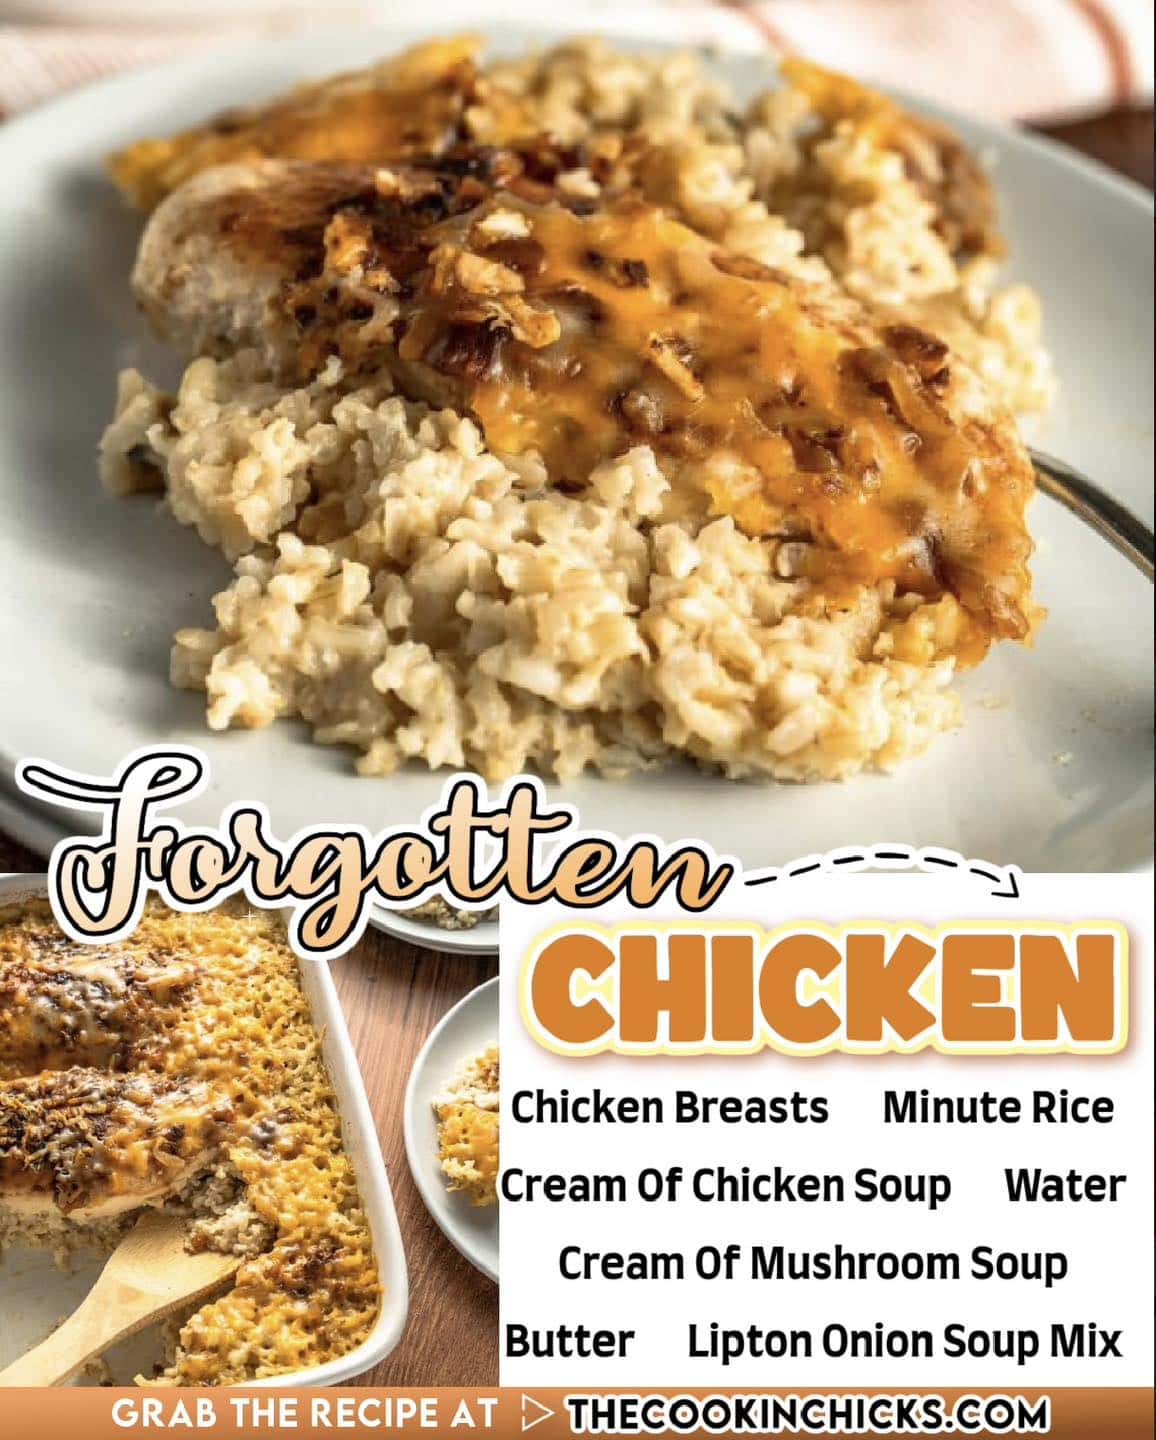 An image featuring the forgotten chicken recipe, ideal for busy families, showcasing a serving of golden-baked chicken over a bed of rice, with ingredients listed including chicken breasts, rice, soup, and